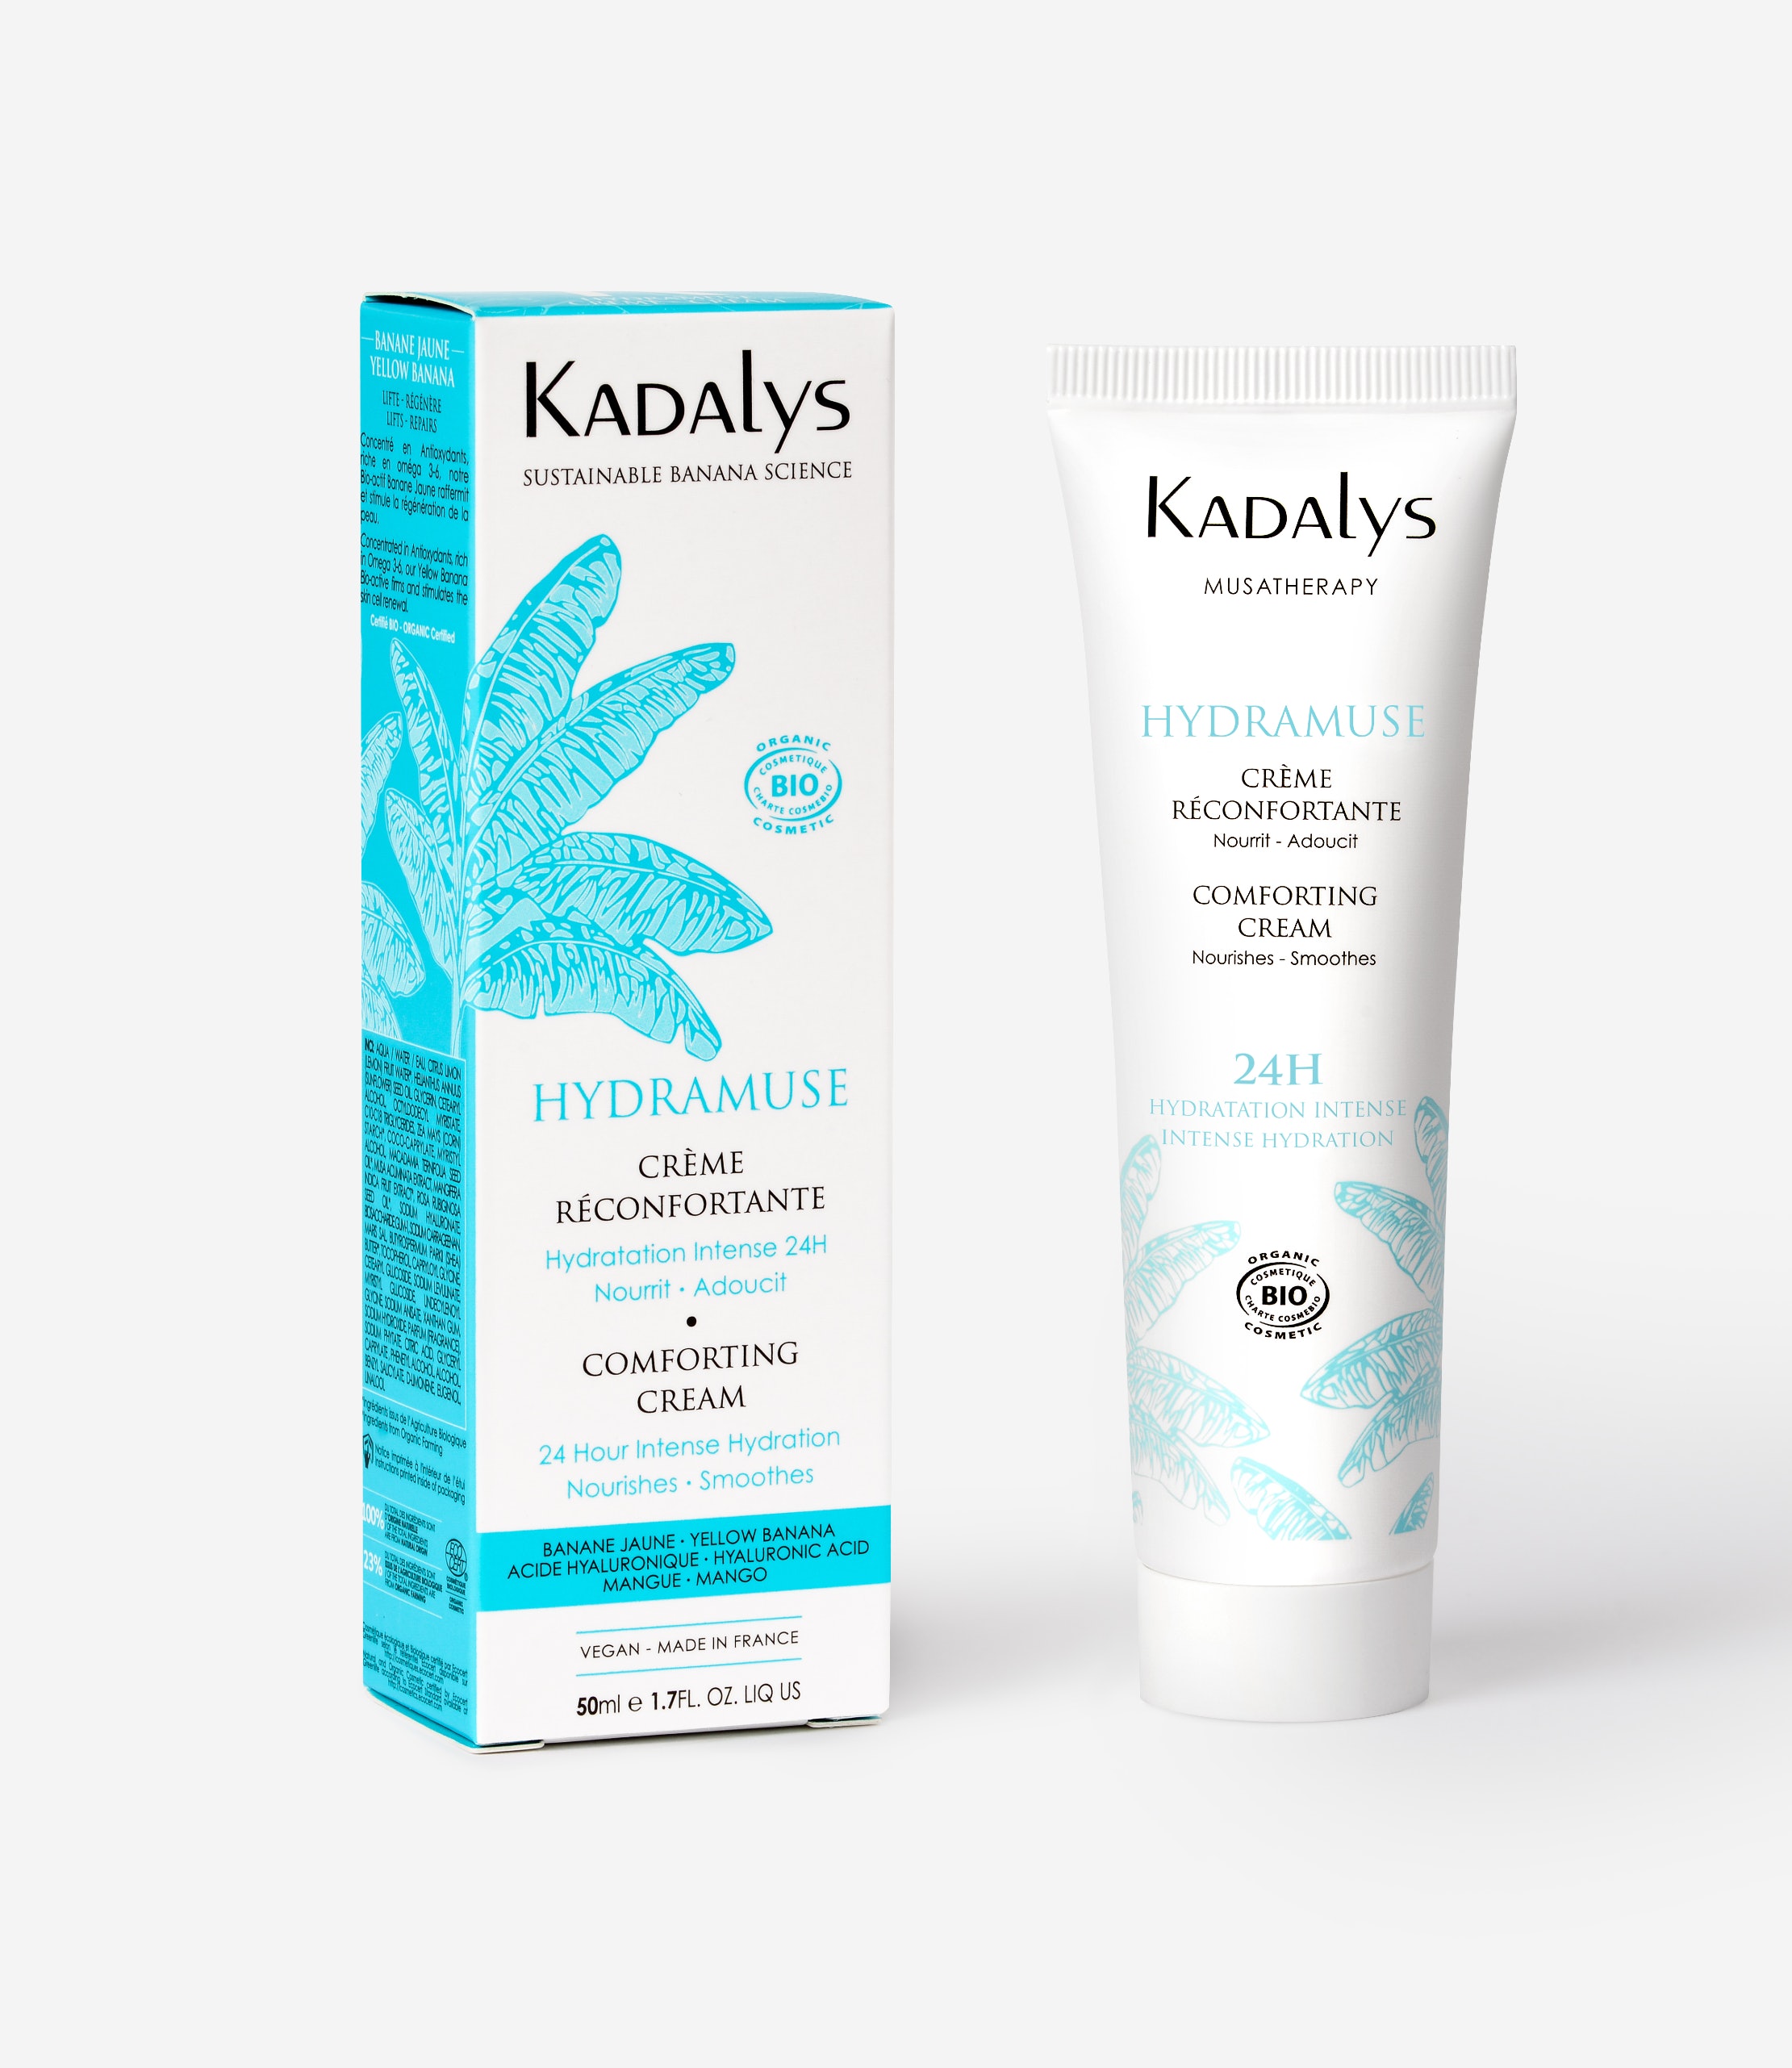 The Organic Comforting Cream, which Kadalys launched in the U.S. on Oct. 13.